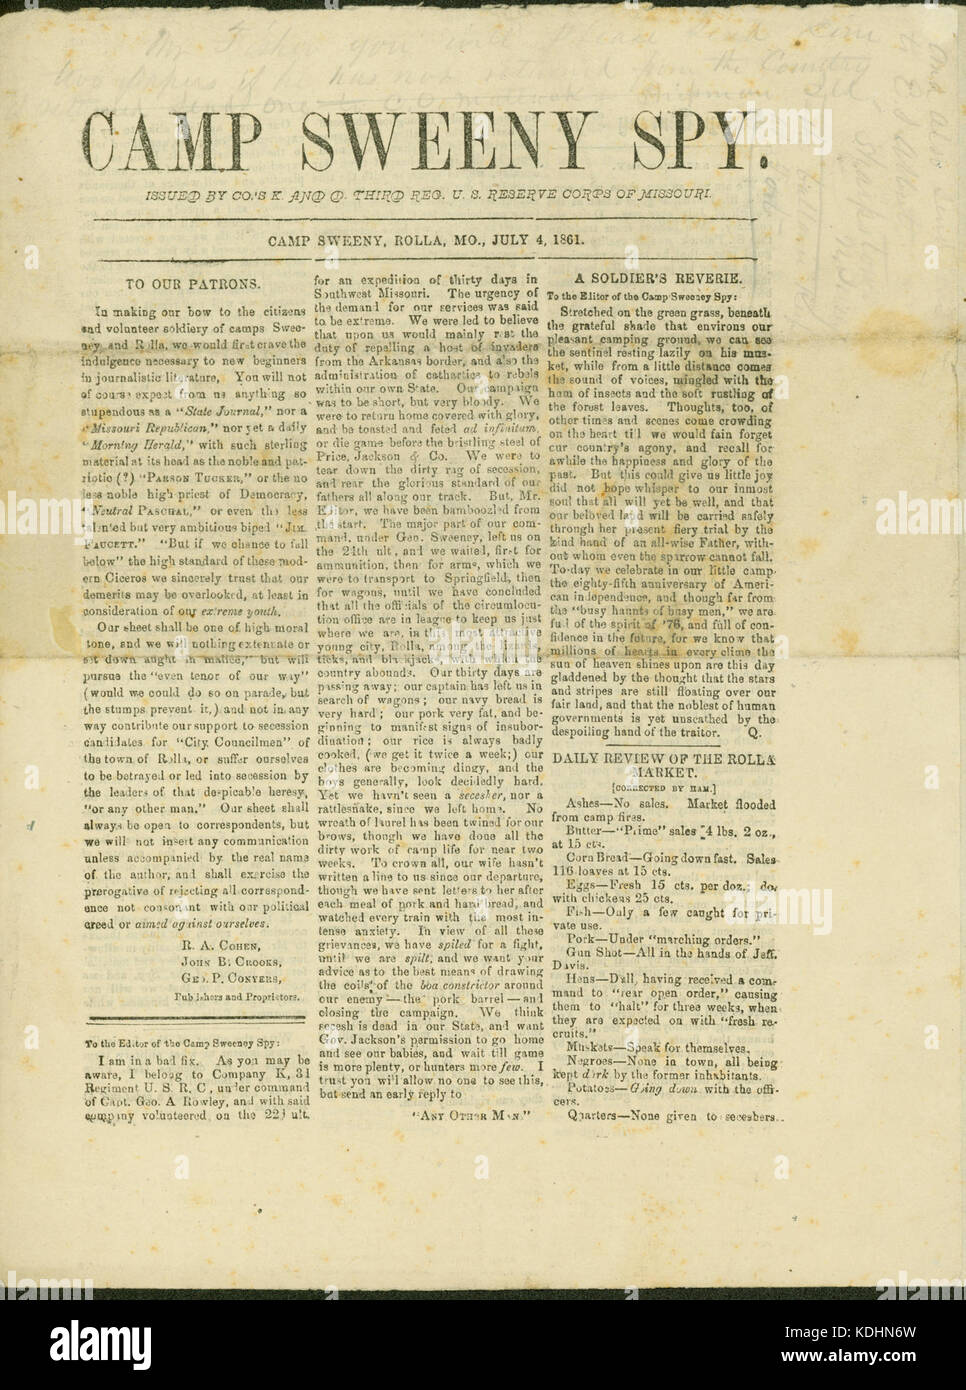 Newspaper issue ofCamp Sweeney Spy,issued by Companies D and K, 3rd U.S.R.C. (3 months), July 4, 1861 Stock Photo